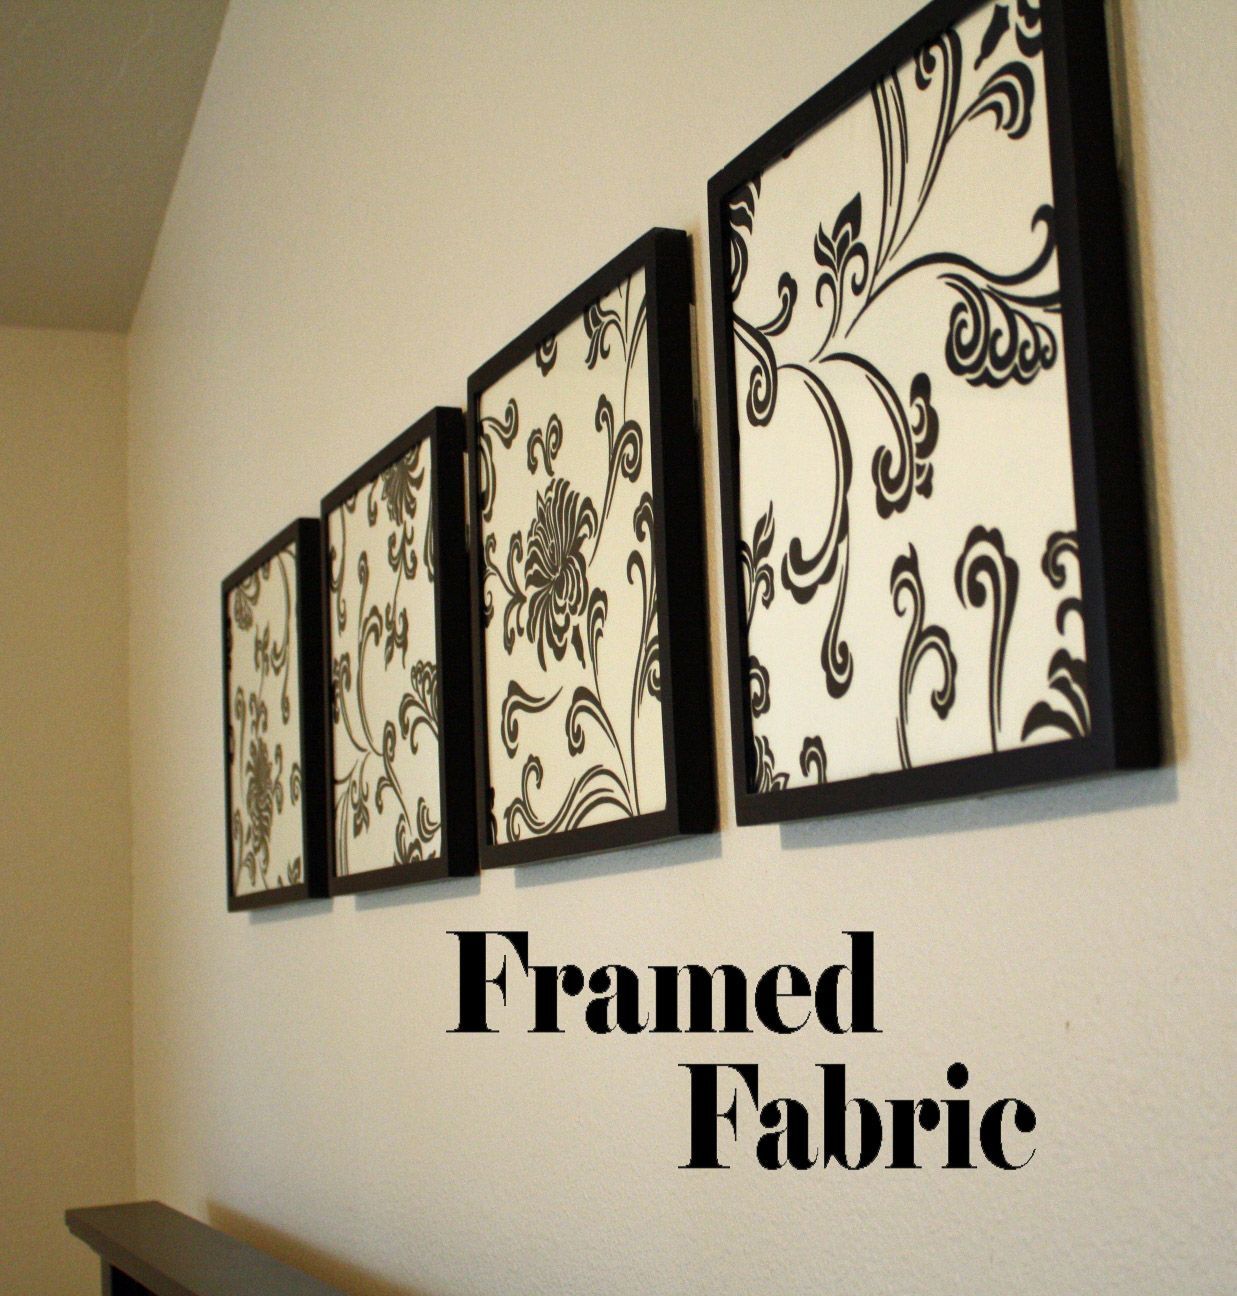 Framed Fabric Wall Decor find a cute fabric that matches your bedroom colors, an